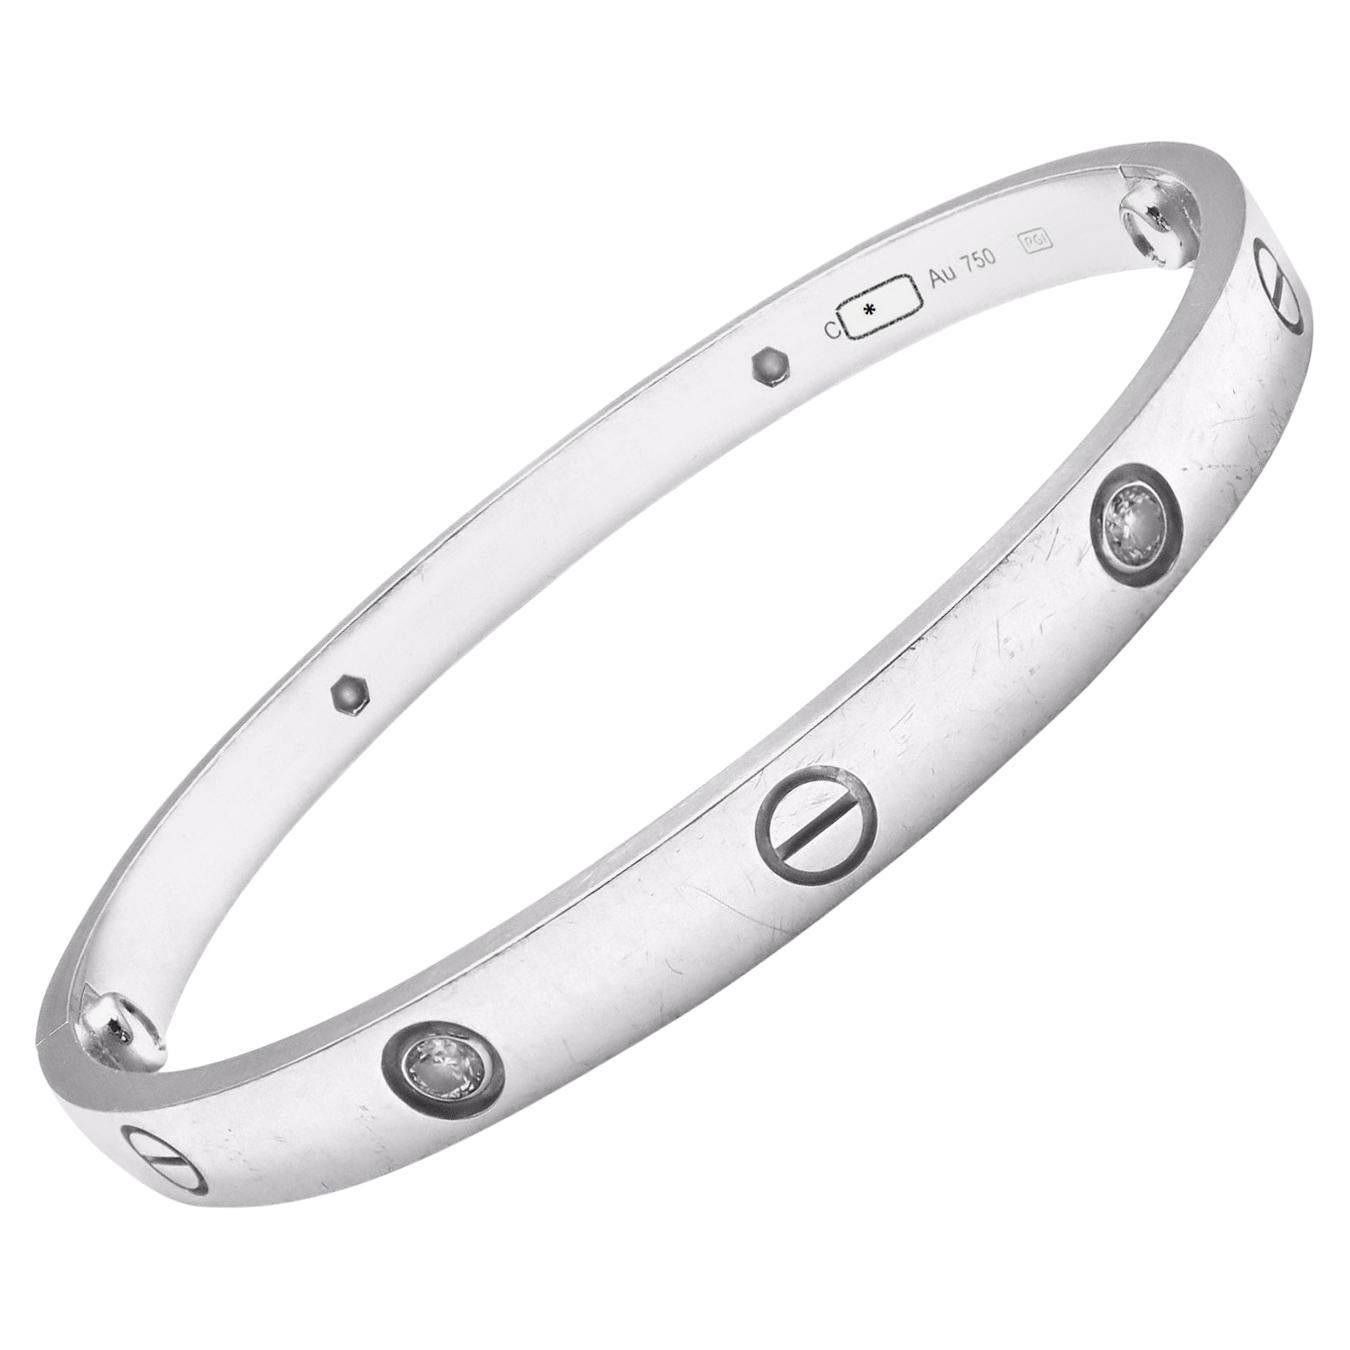 18k White Gold 4 Diamond Cartier LOVE Bangle Bracelet, size 19 with New Screw System!
With 4 brilliant round cut diamonds, VS1 clarity, E-F color total weight approx. .20ct
This bracelet comes with a Cartier box, screwdriver and a certificate of